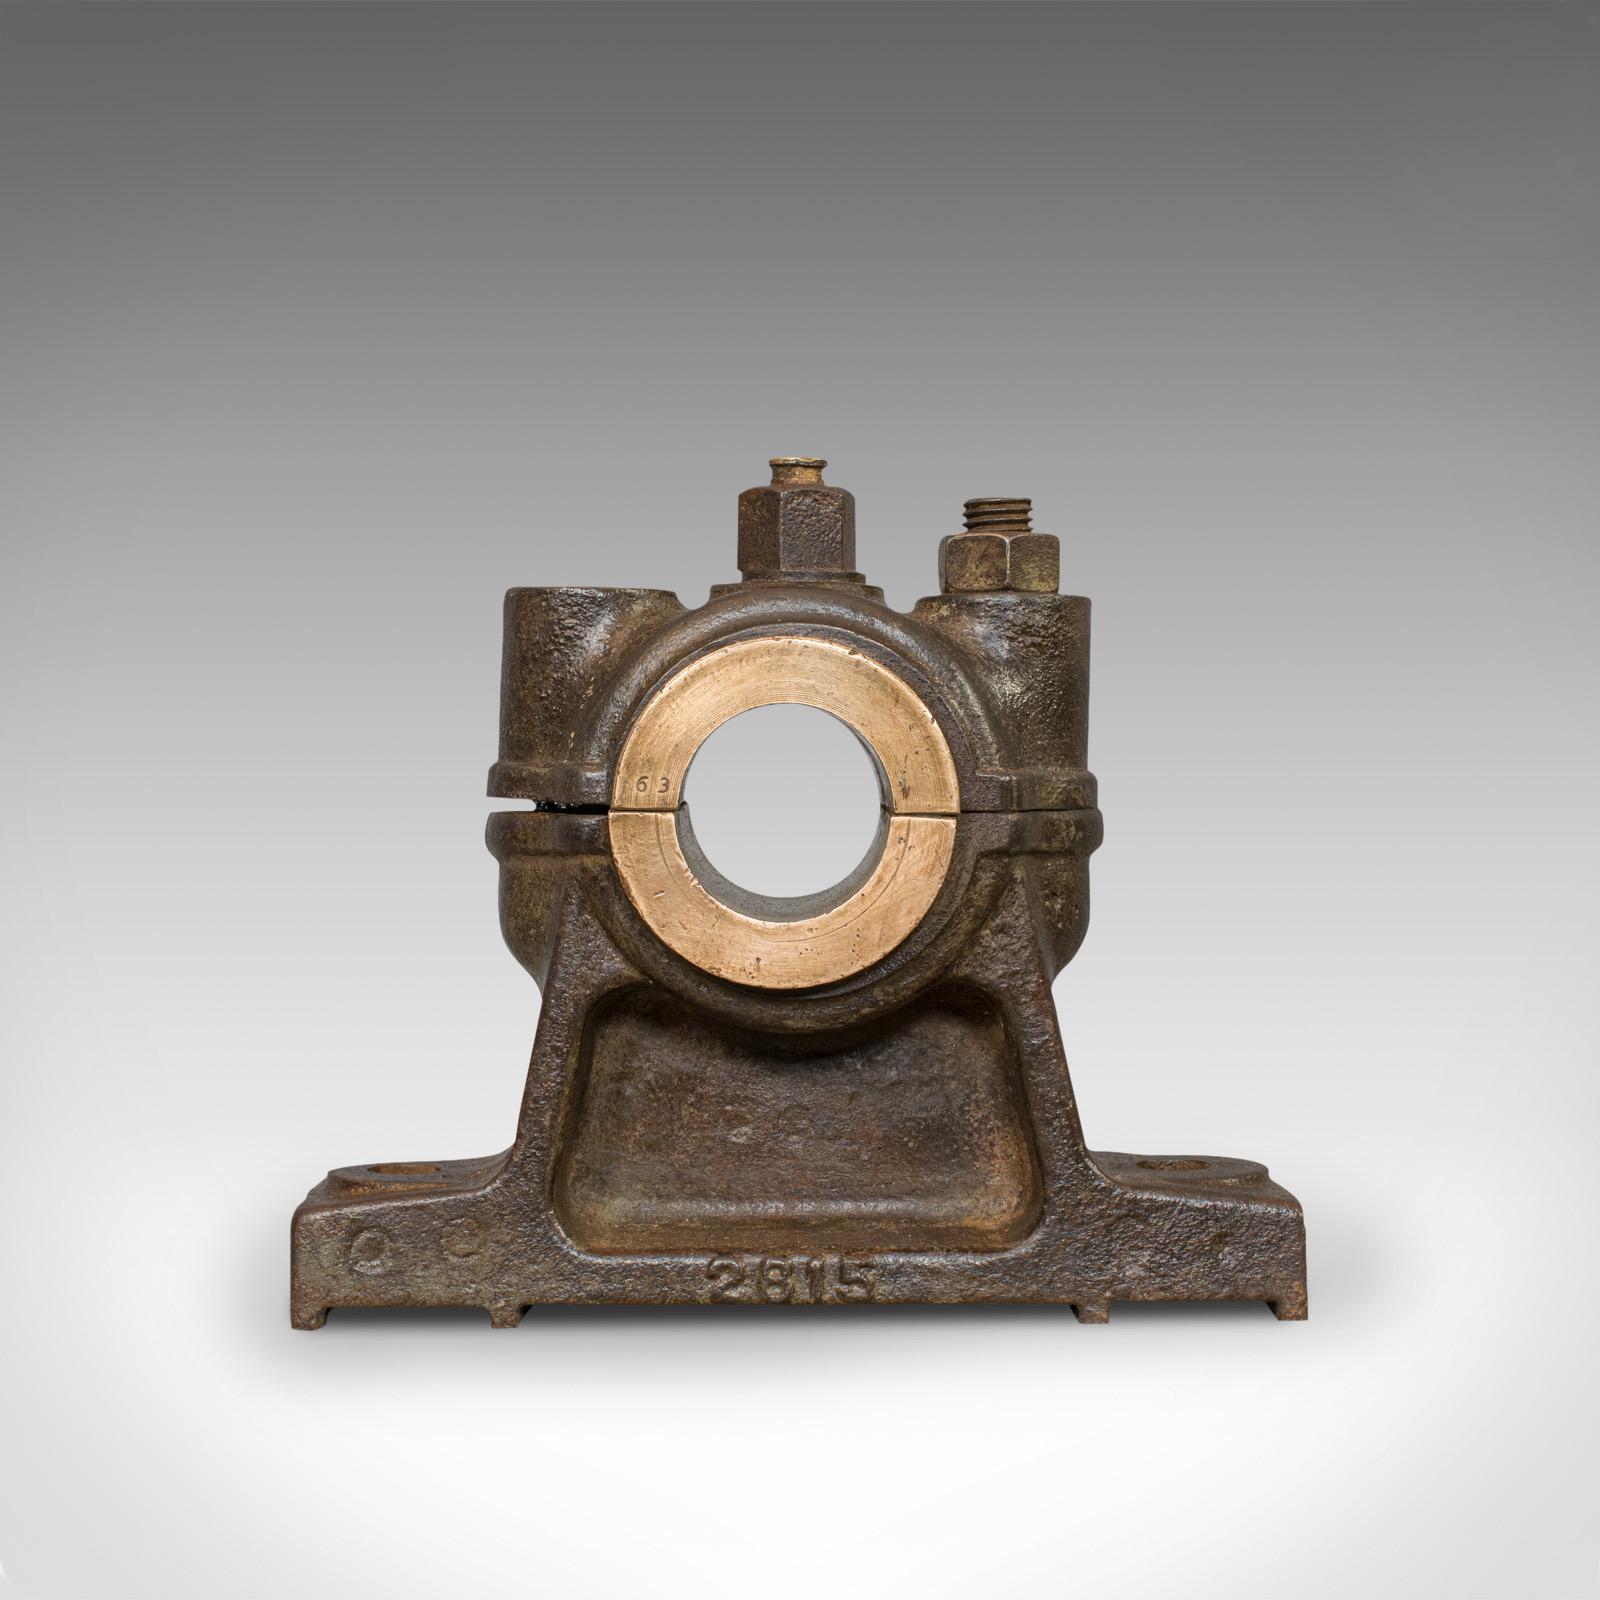 This is an antique engine bearing with waxed finish. An English, cast iron and bronze desktop paperweight or ornament, and dating to the late 19th century, circa 1900.

Finely aged form and a fascinating desk ornament
Displaying a desirable aged